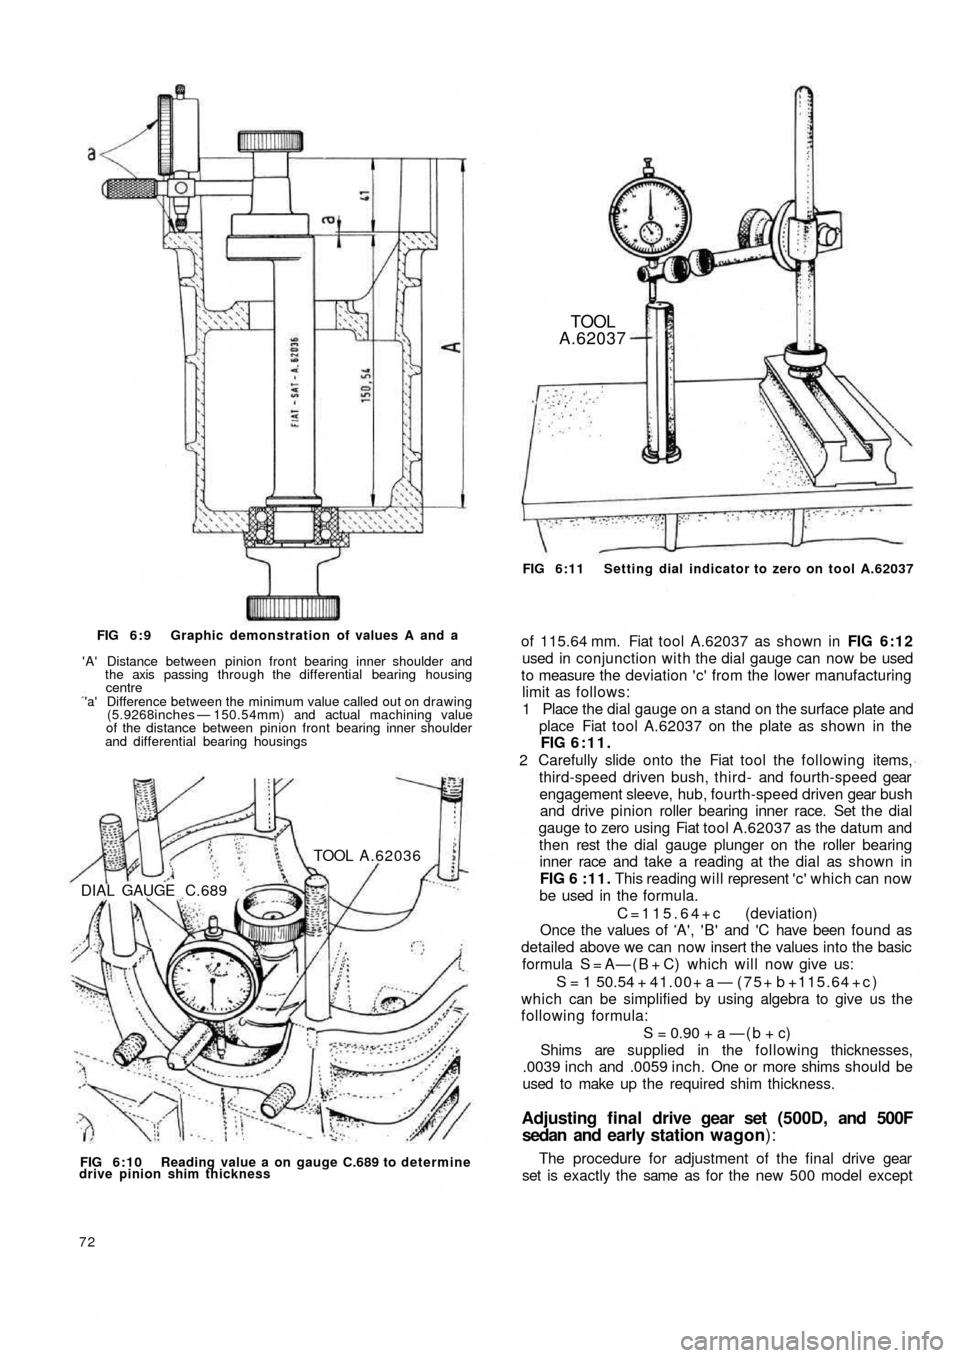 FIAT 500 1970 1.G Workshop Manual FIG 6:9  Graphic demonstration of values A and a
A Distance between pinion front bearing inner shoulder and
the axis passing through the differential bearing housing
centrea Difference between the